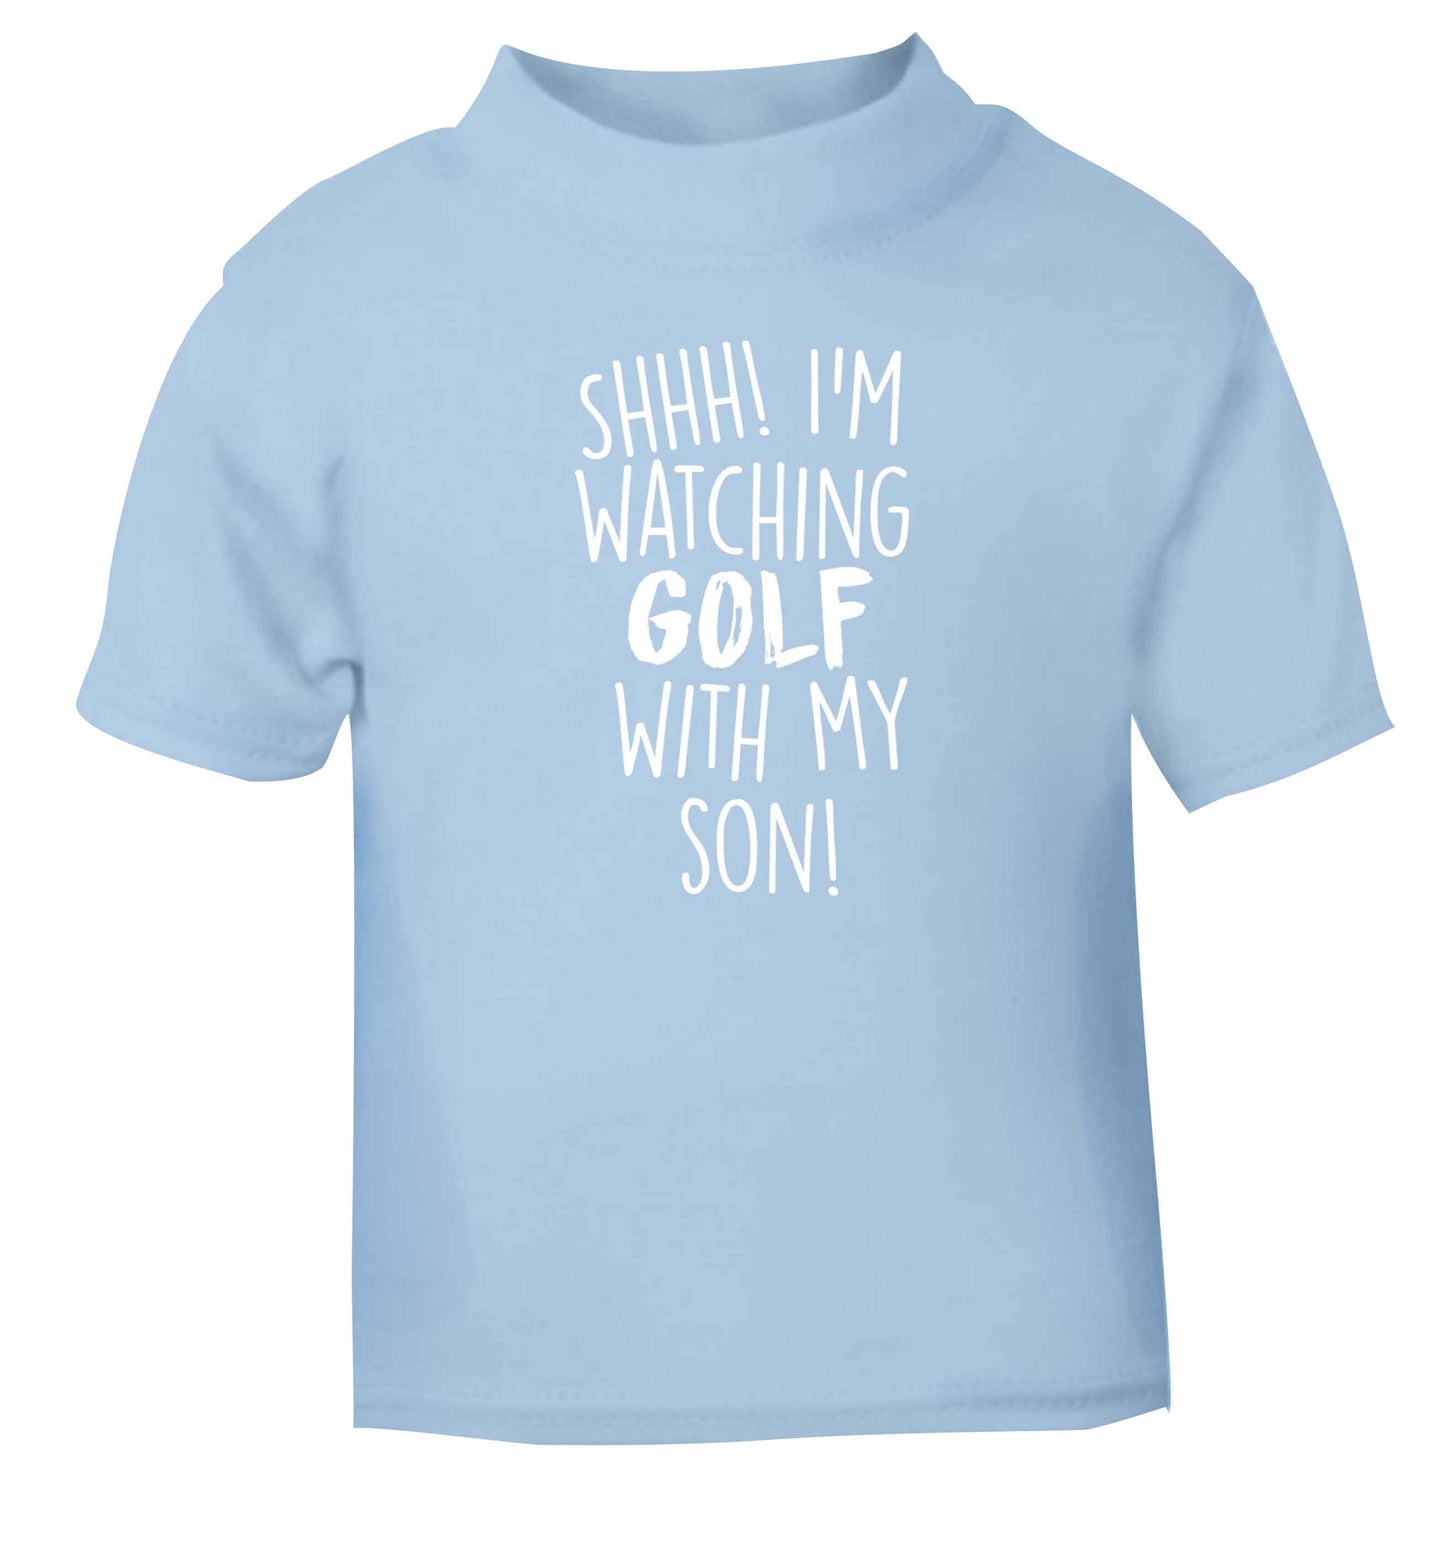 Shh I'm watching golf with my son light blue Baby Toddler Tshirt 2 Years